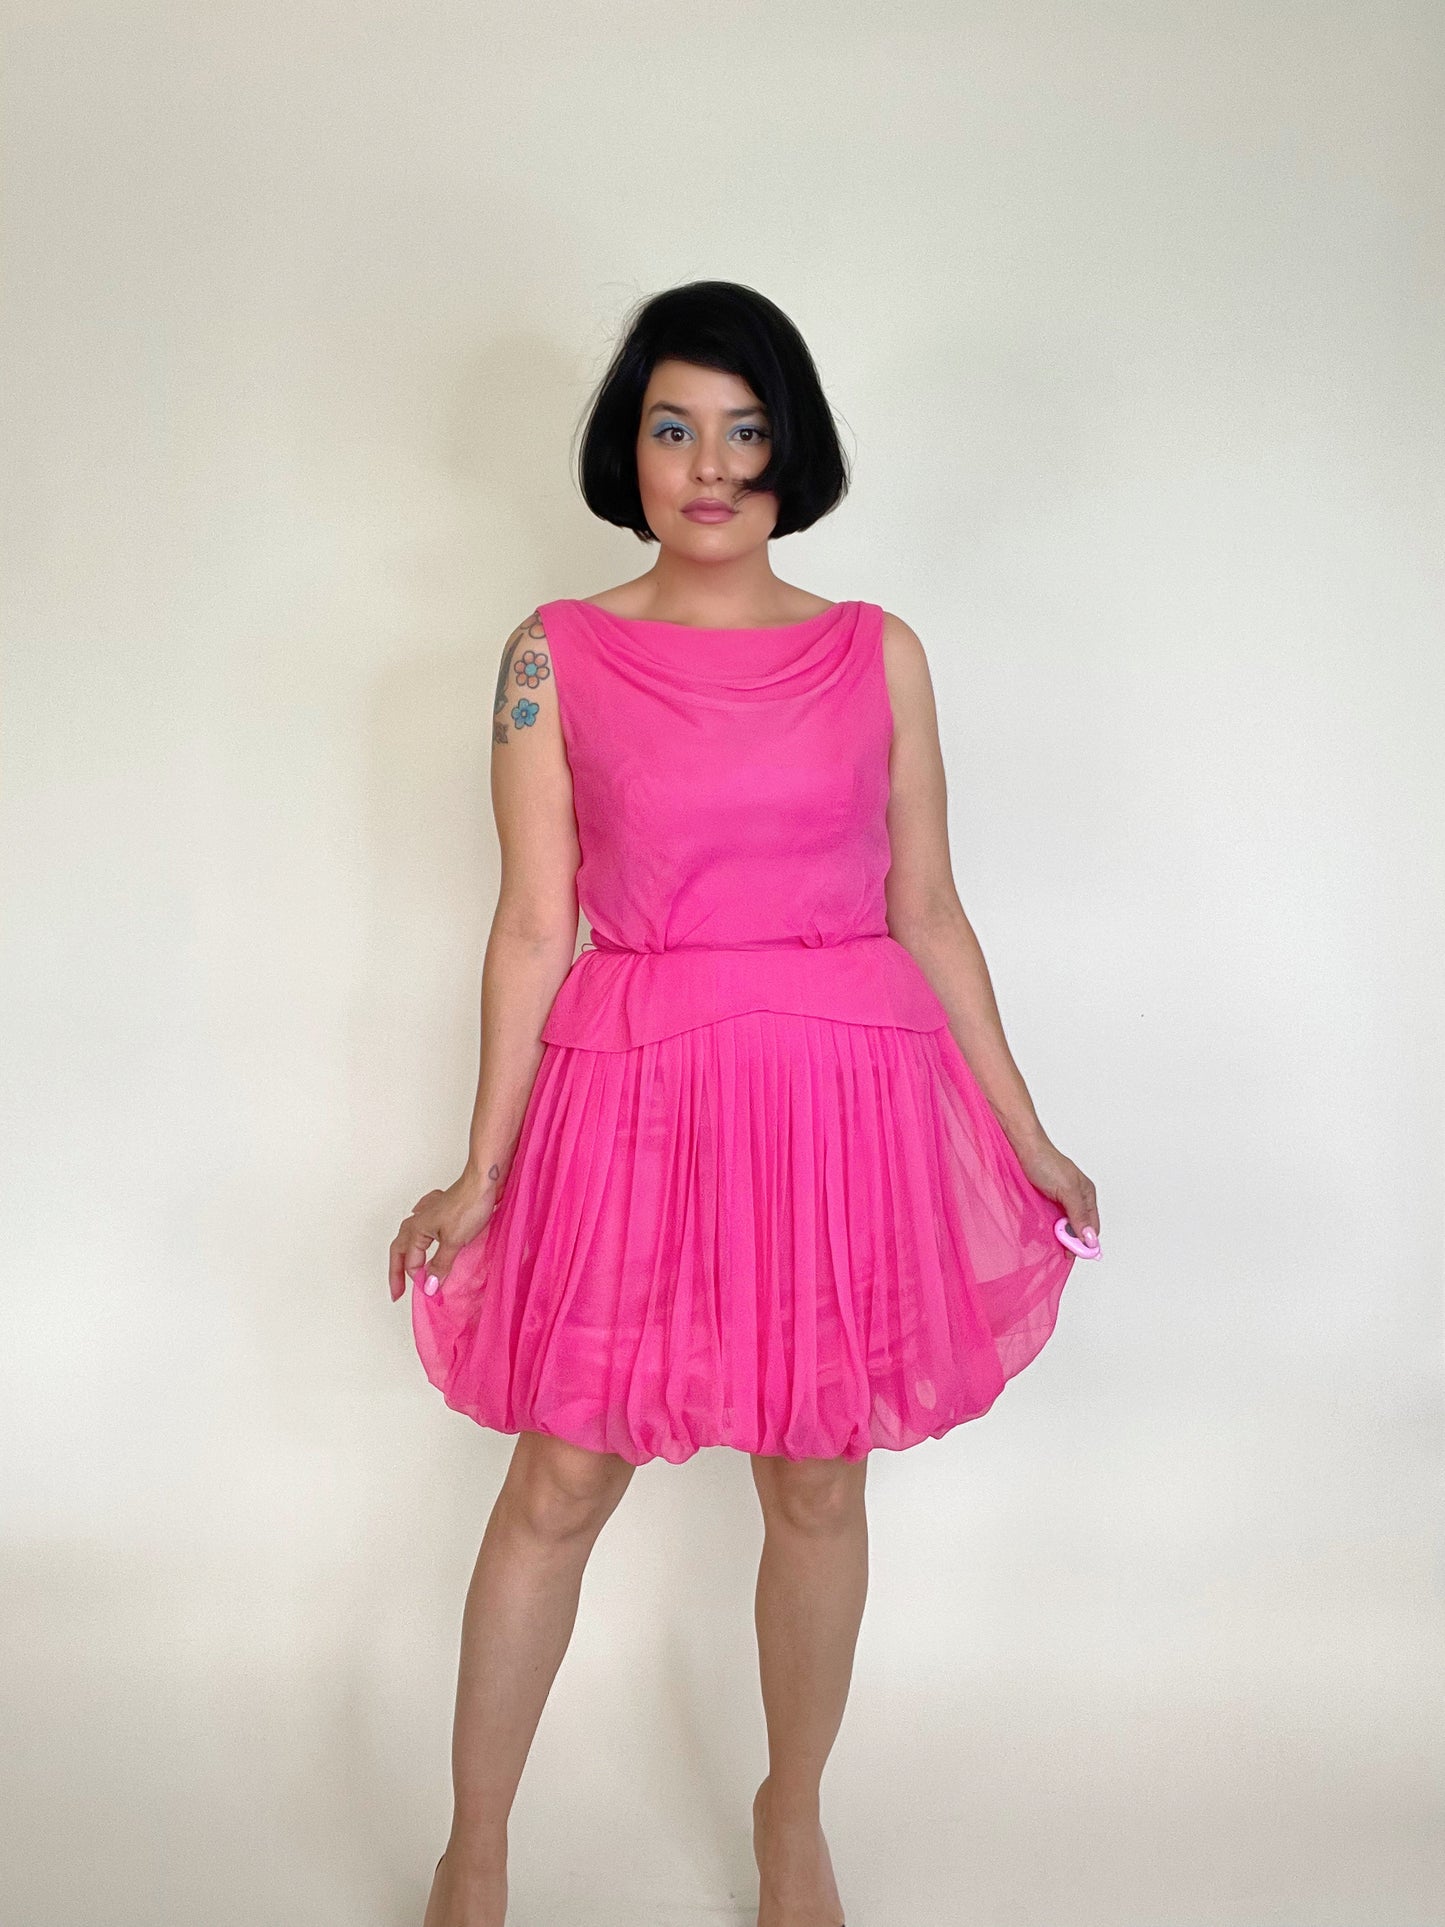 Vintage 60s Flamingo Pink Chiffon Dress with Bubble Hemline and Pleated Skirt Fits Sizes XS-S